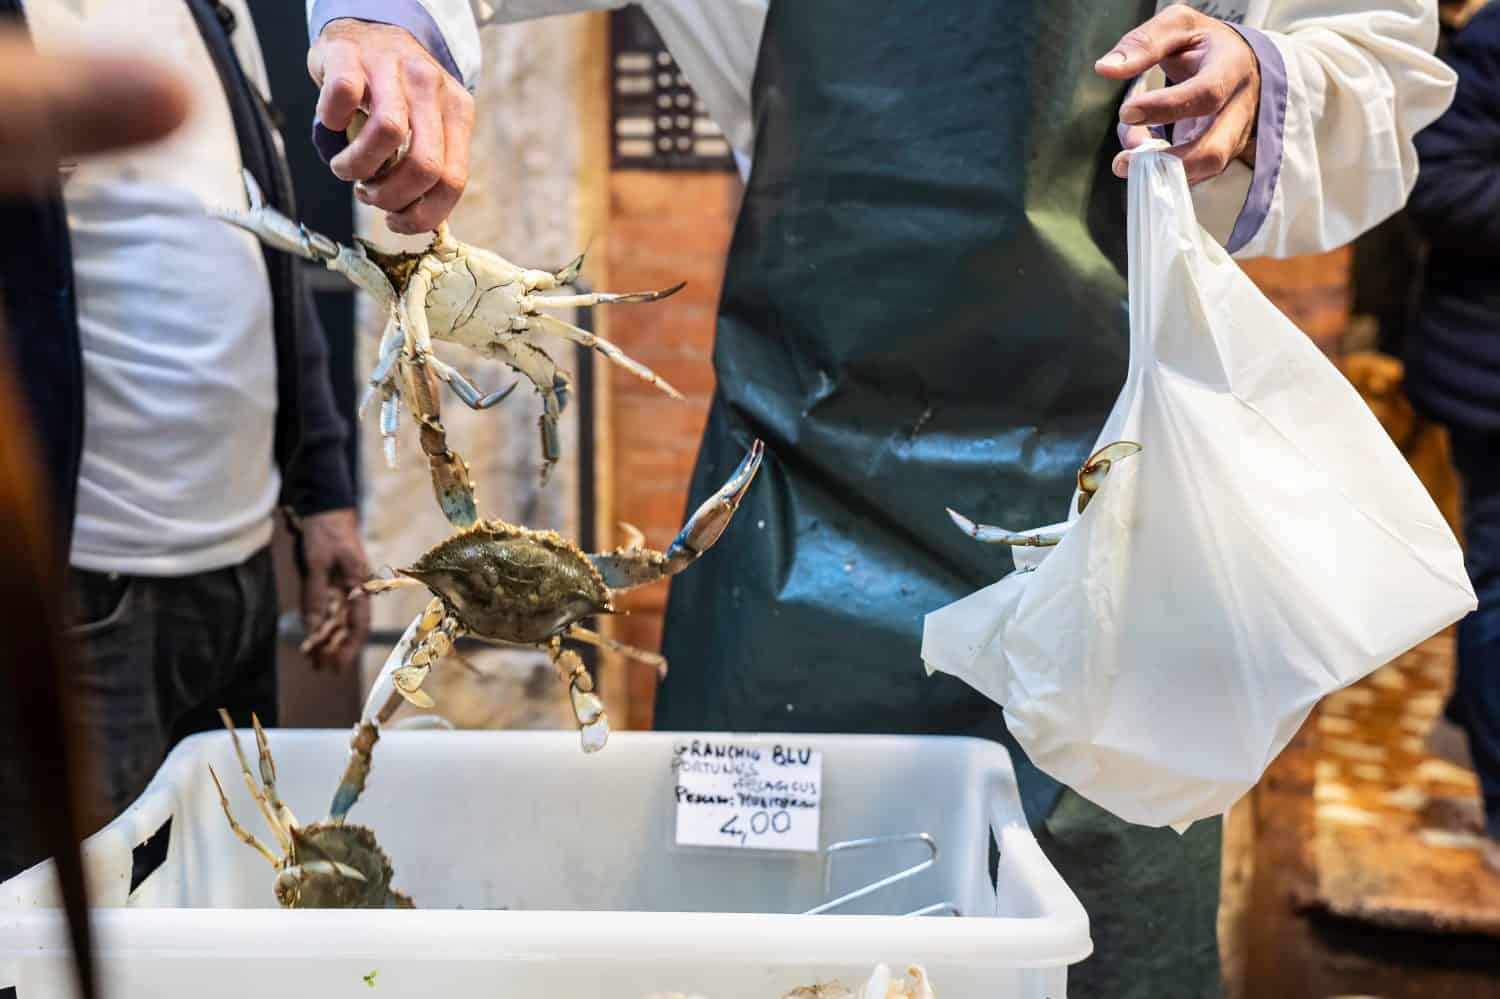 People at the market to fish counter - The seller is putting callinectes sapidus blue crabs into the bag - blue crabs are american atlantic coasts - They cause damage to fishing by preying on clams